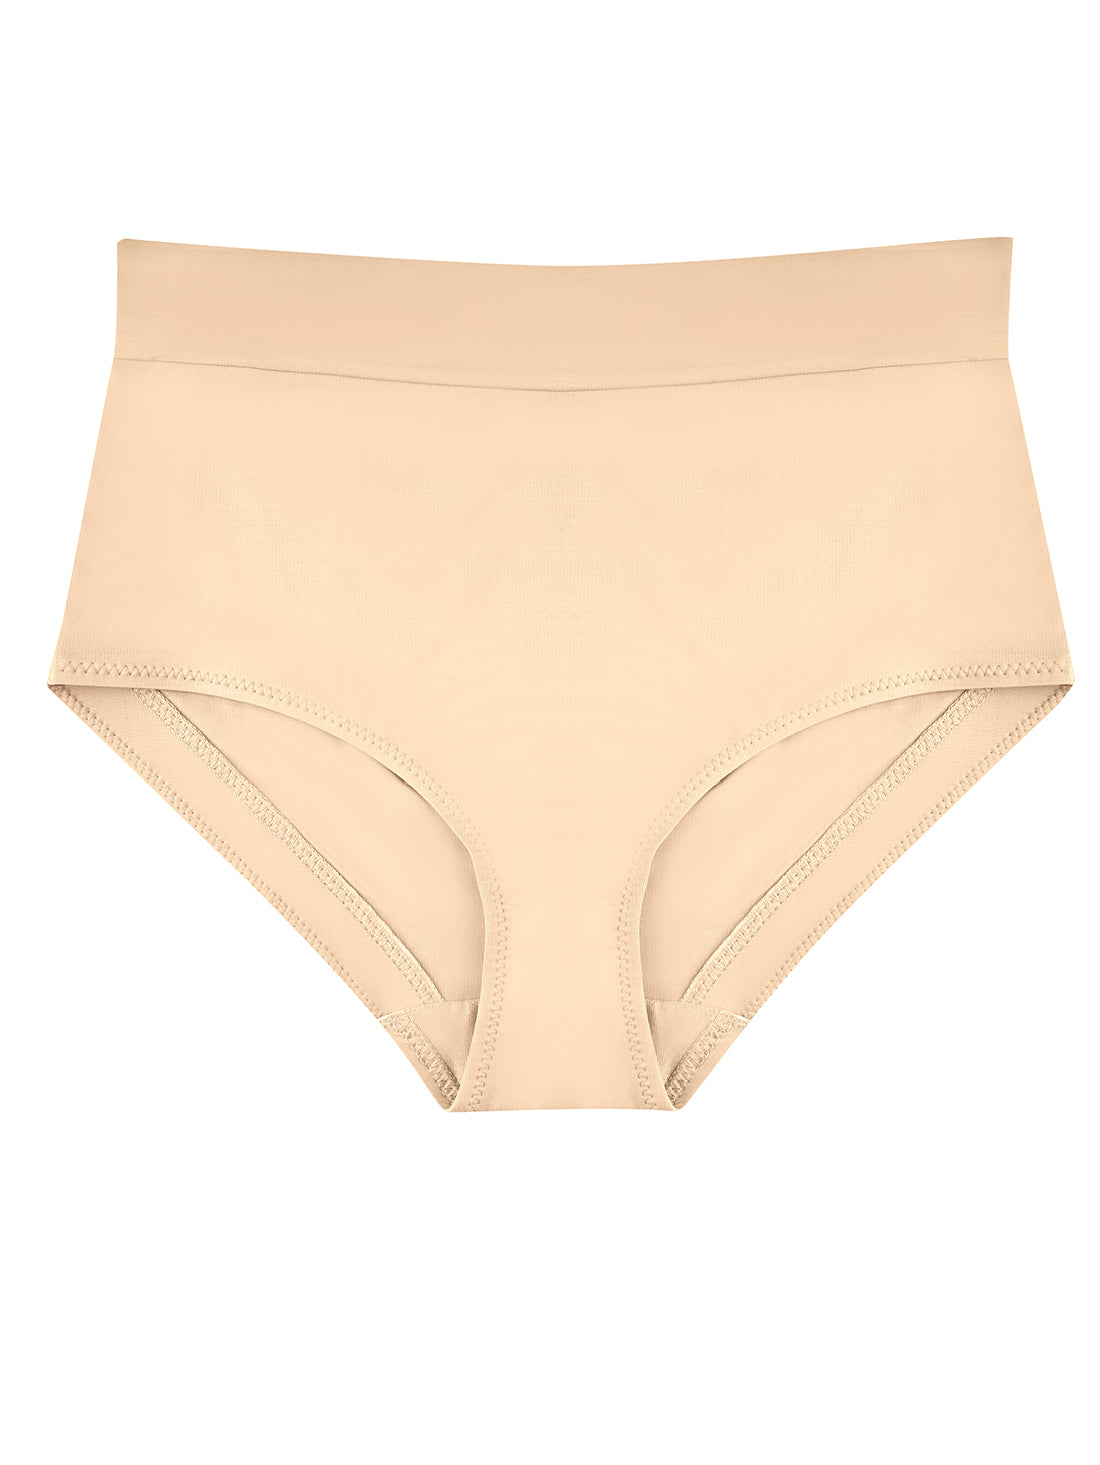 Eco High Rise Seamless Panty ivory order online